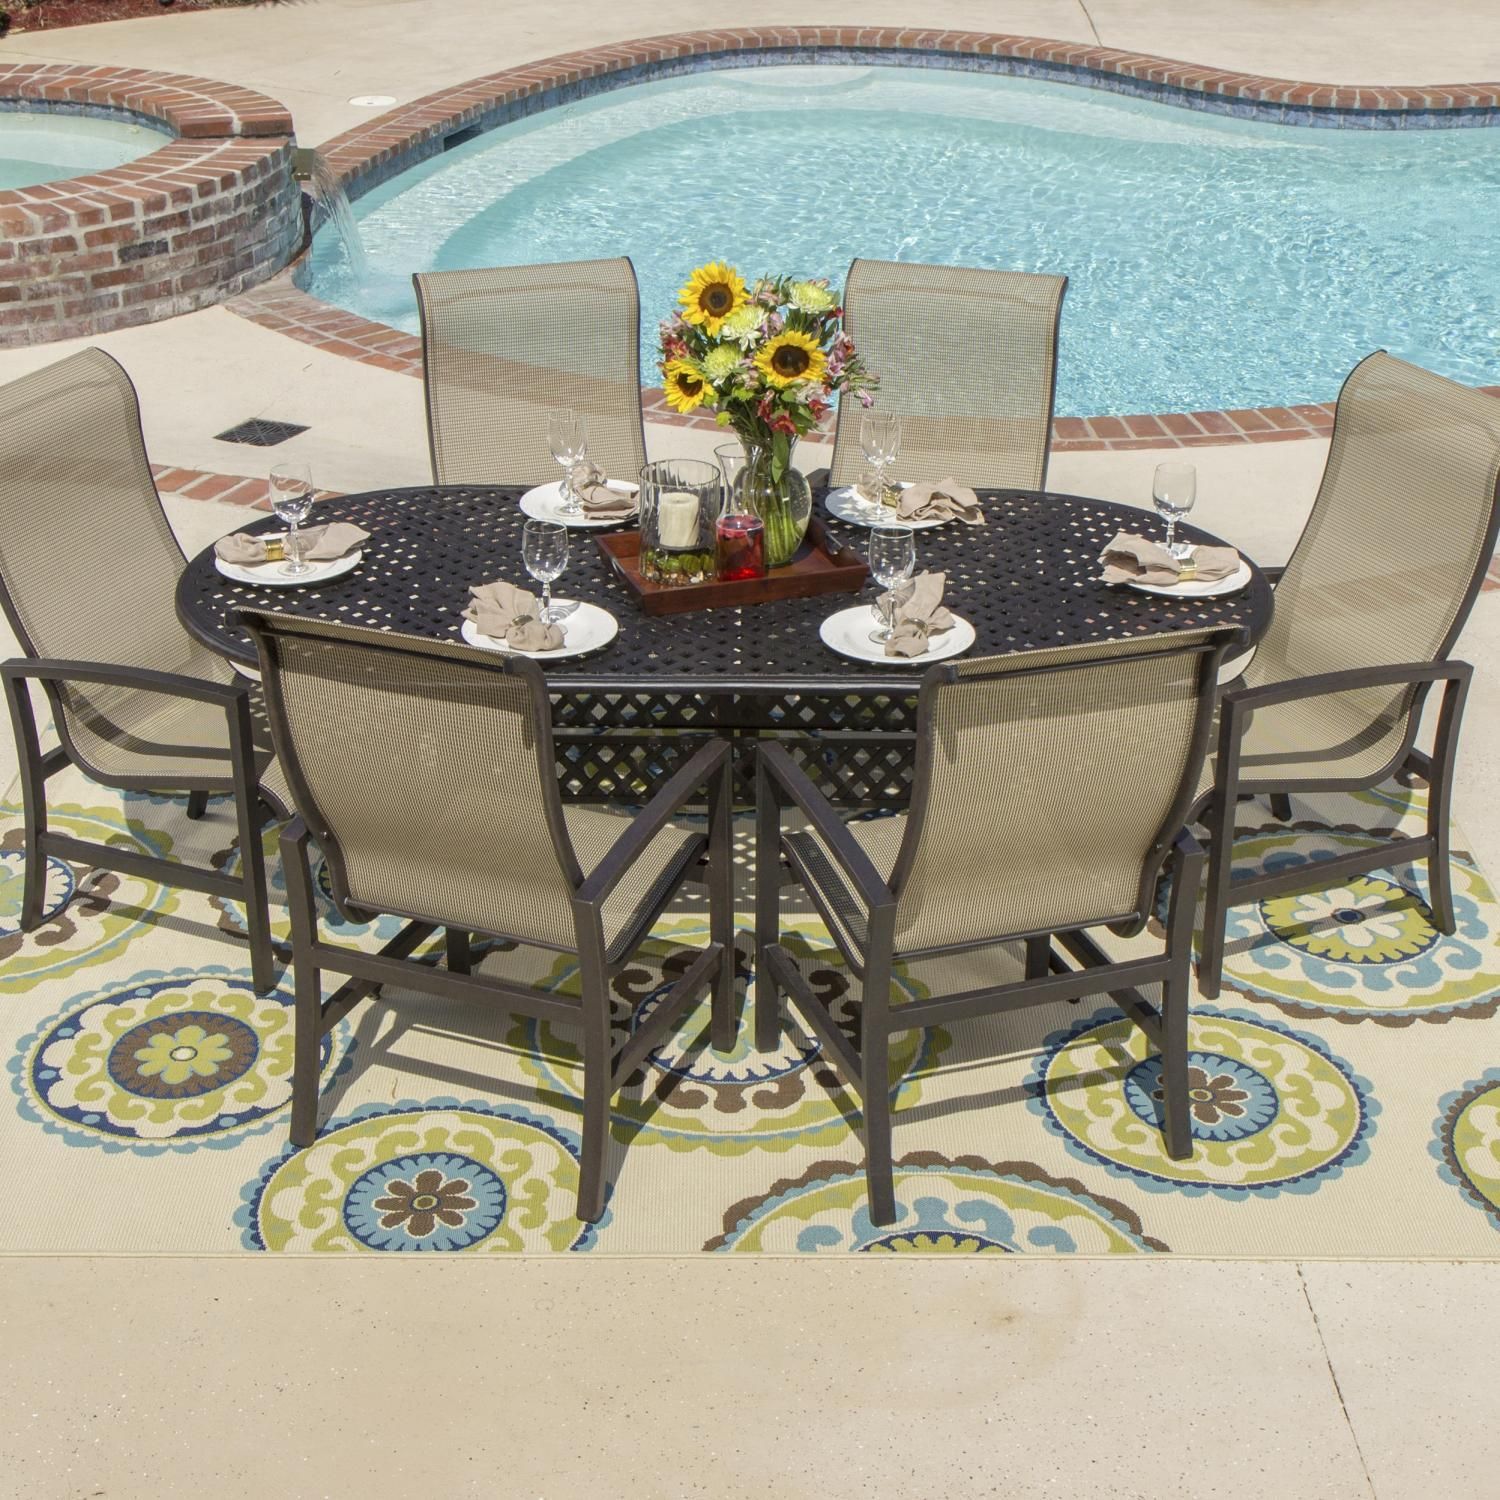 Acadia 7 Piece Sling Patio Dining Set With Oval Tablelakeview Regarding 7 Piece Outdoor Oval Dining Sets (View 5 of 15)